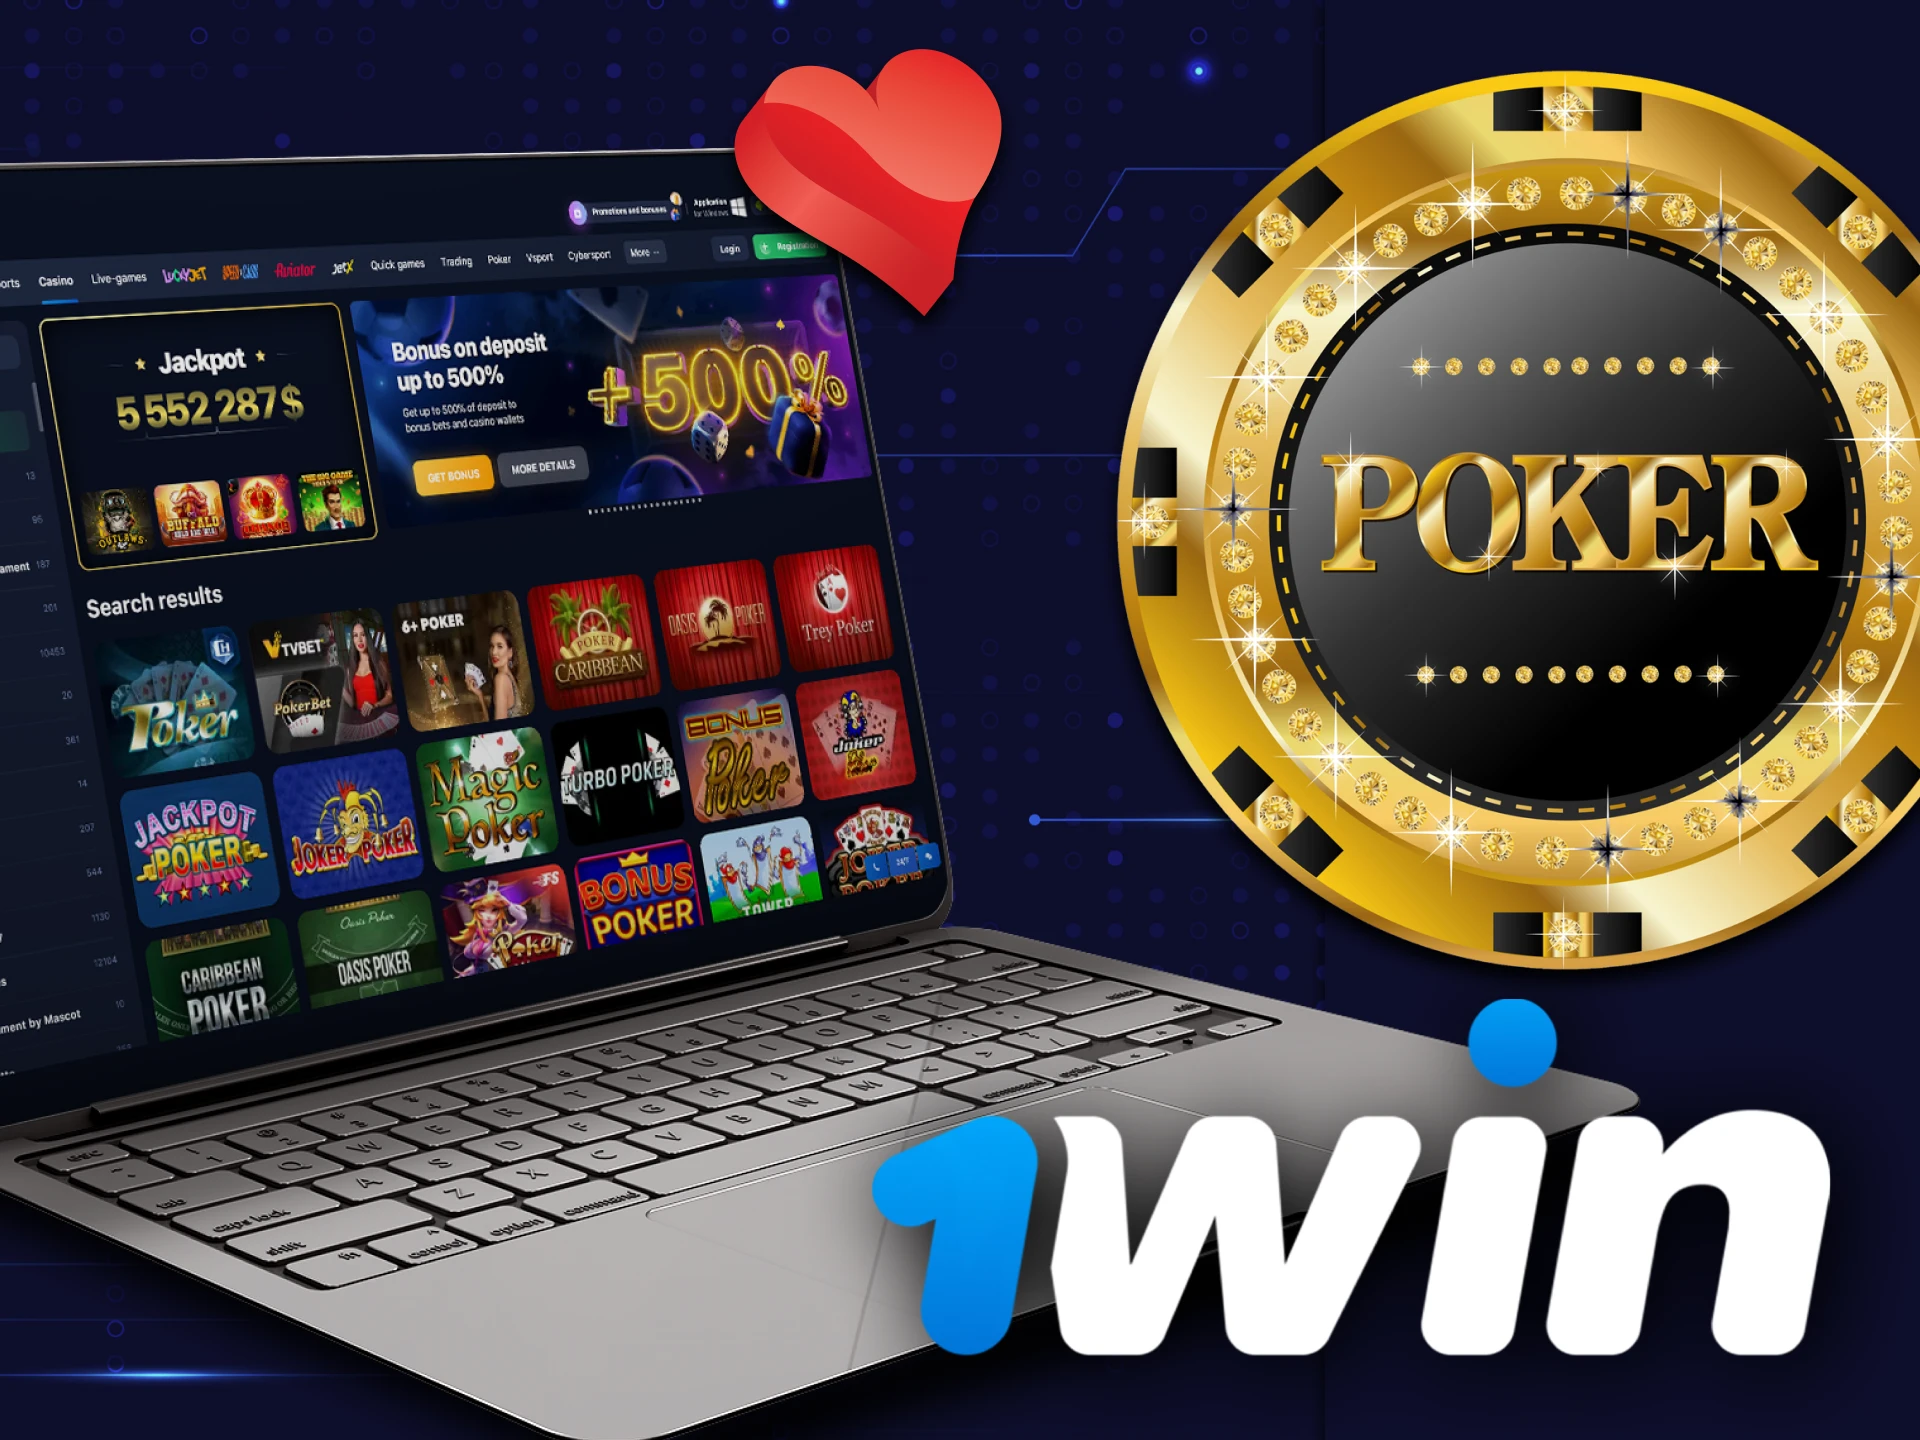 Play poker games in the 1win casino.